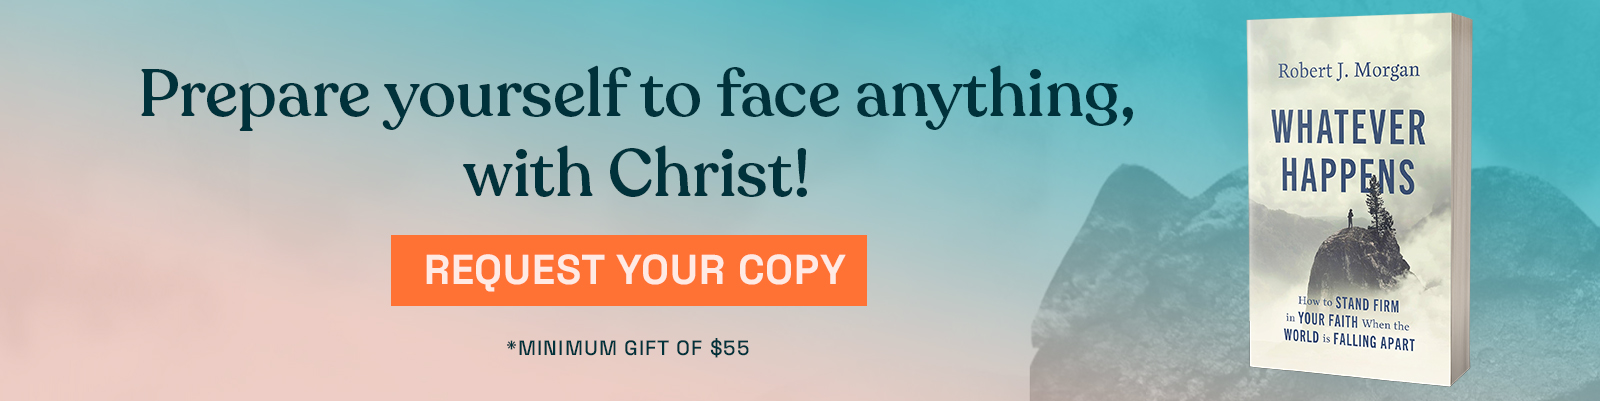 July Ministry offer